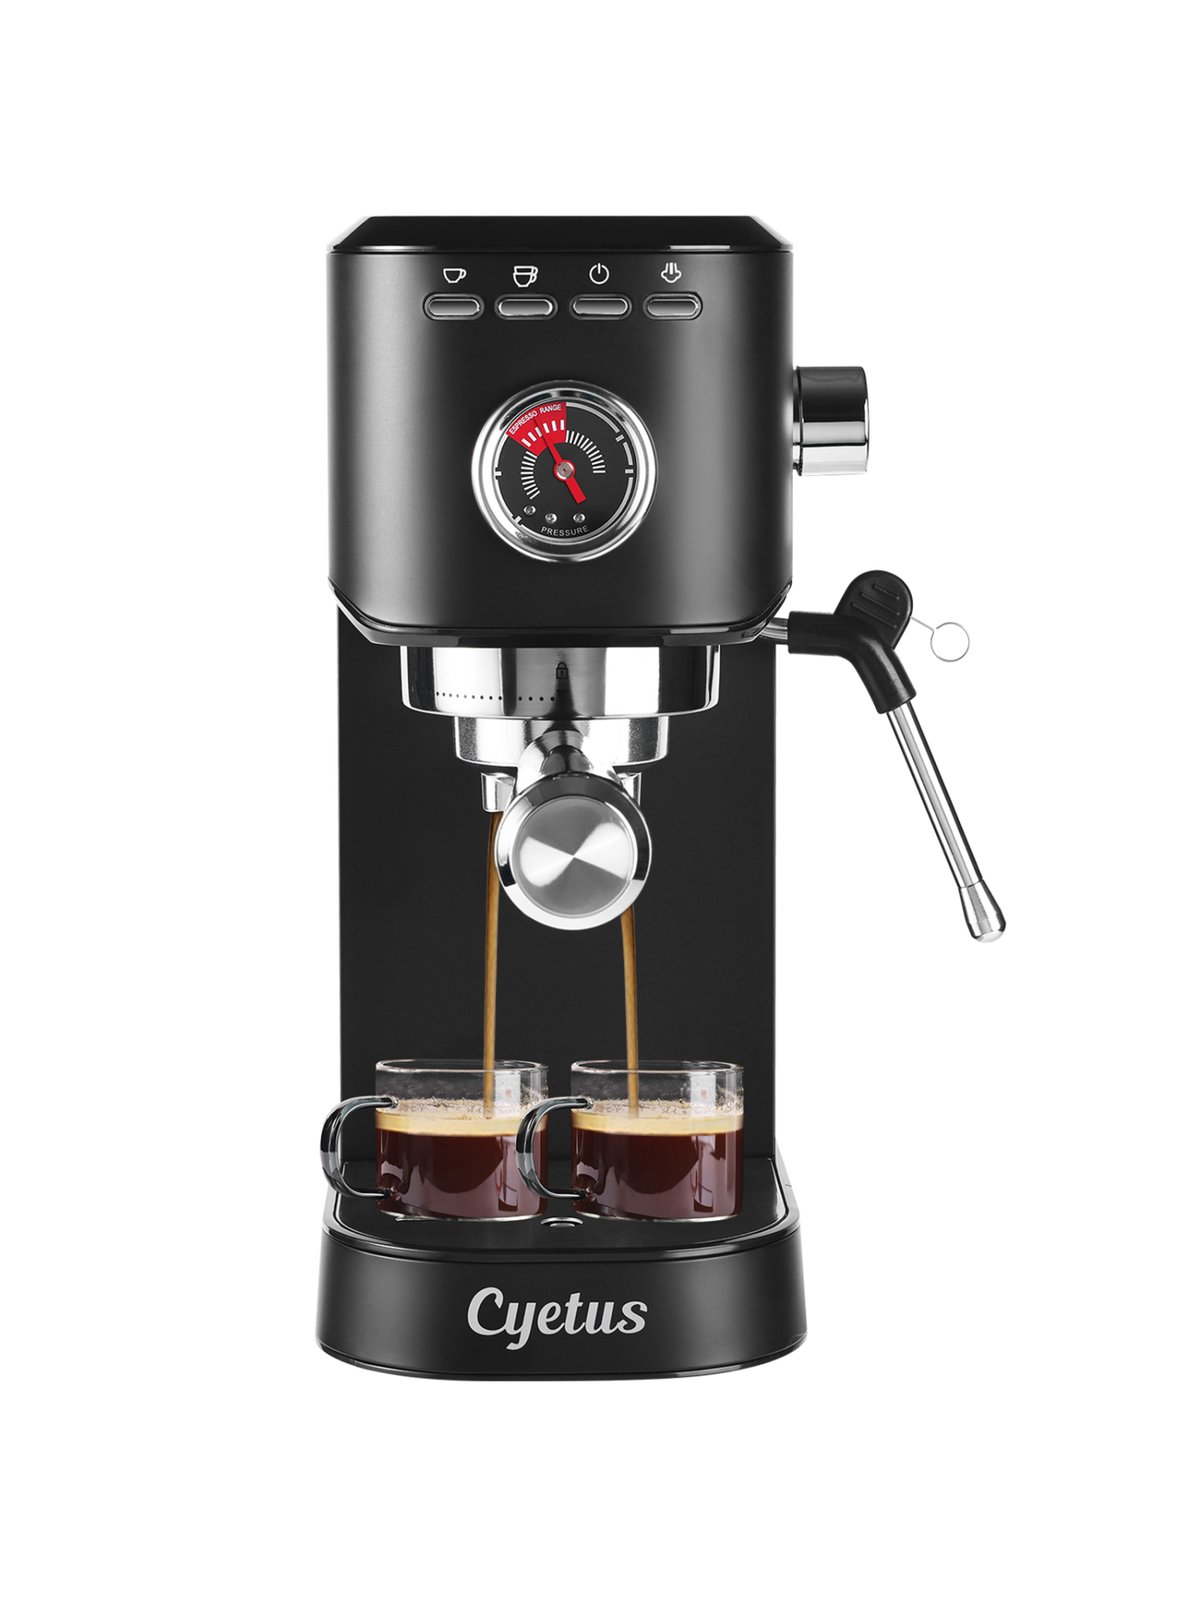 https://images.verishop.com/cyetus-black-espresso-machine-with-milk-steam-frother-wand-and-4-in-1-automatic-milk-frother-steamer-and-milk-foam/M00679283562675-3443750584?auto=format&cs=strip&fit=max&w=1200